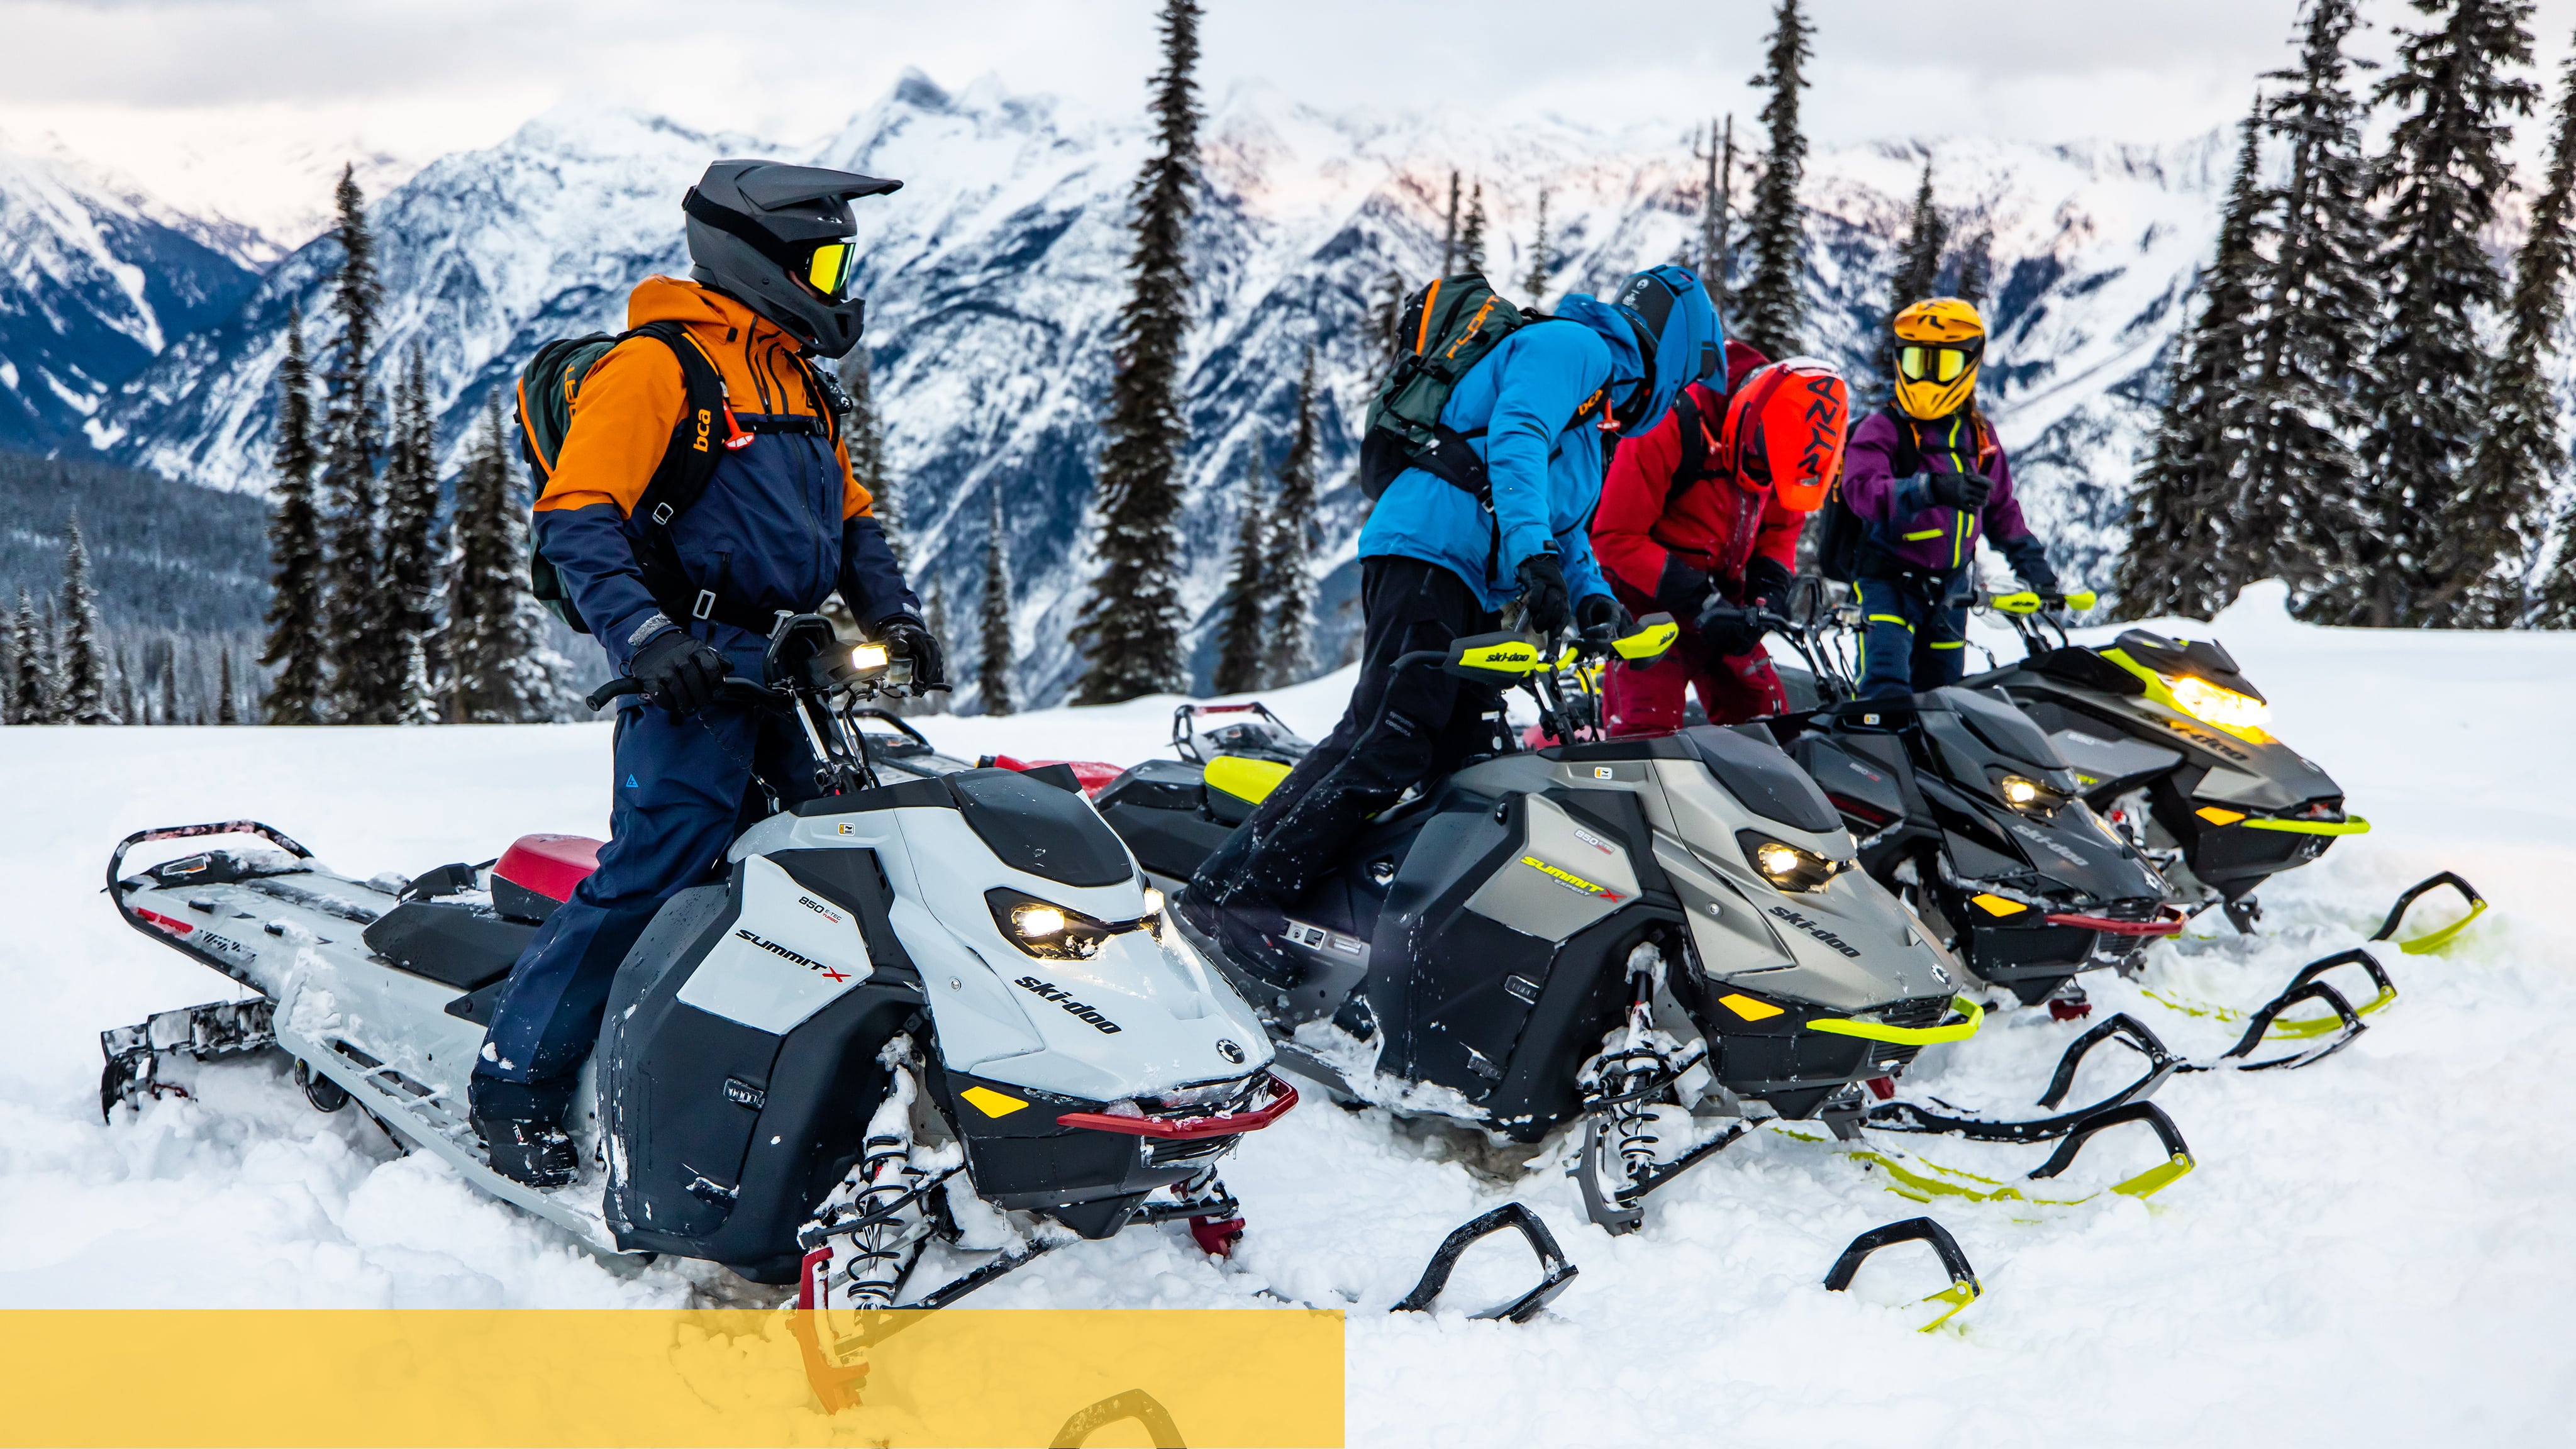 Friends talking during a ride with their Ski-Doo snowmobiles